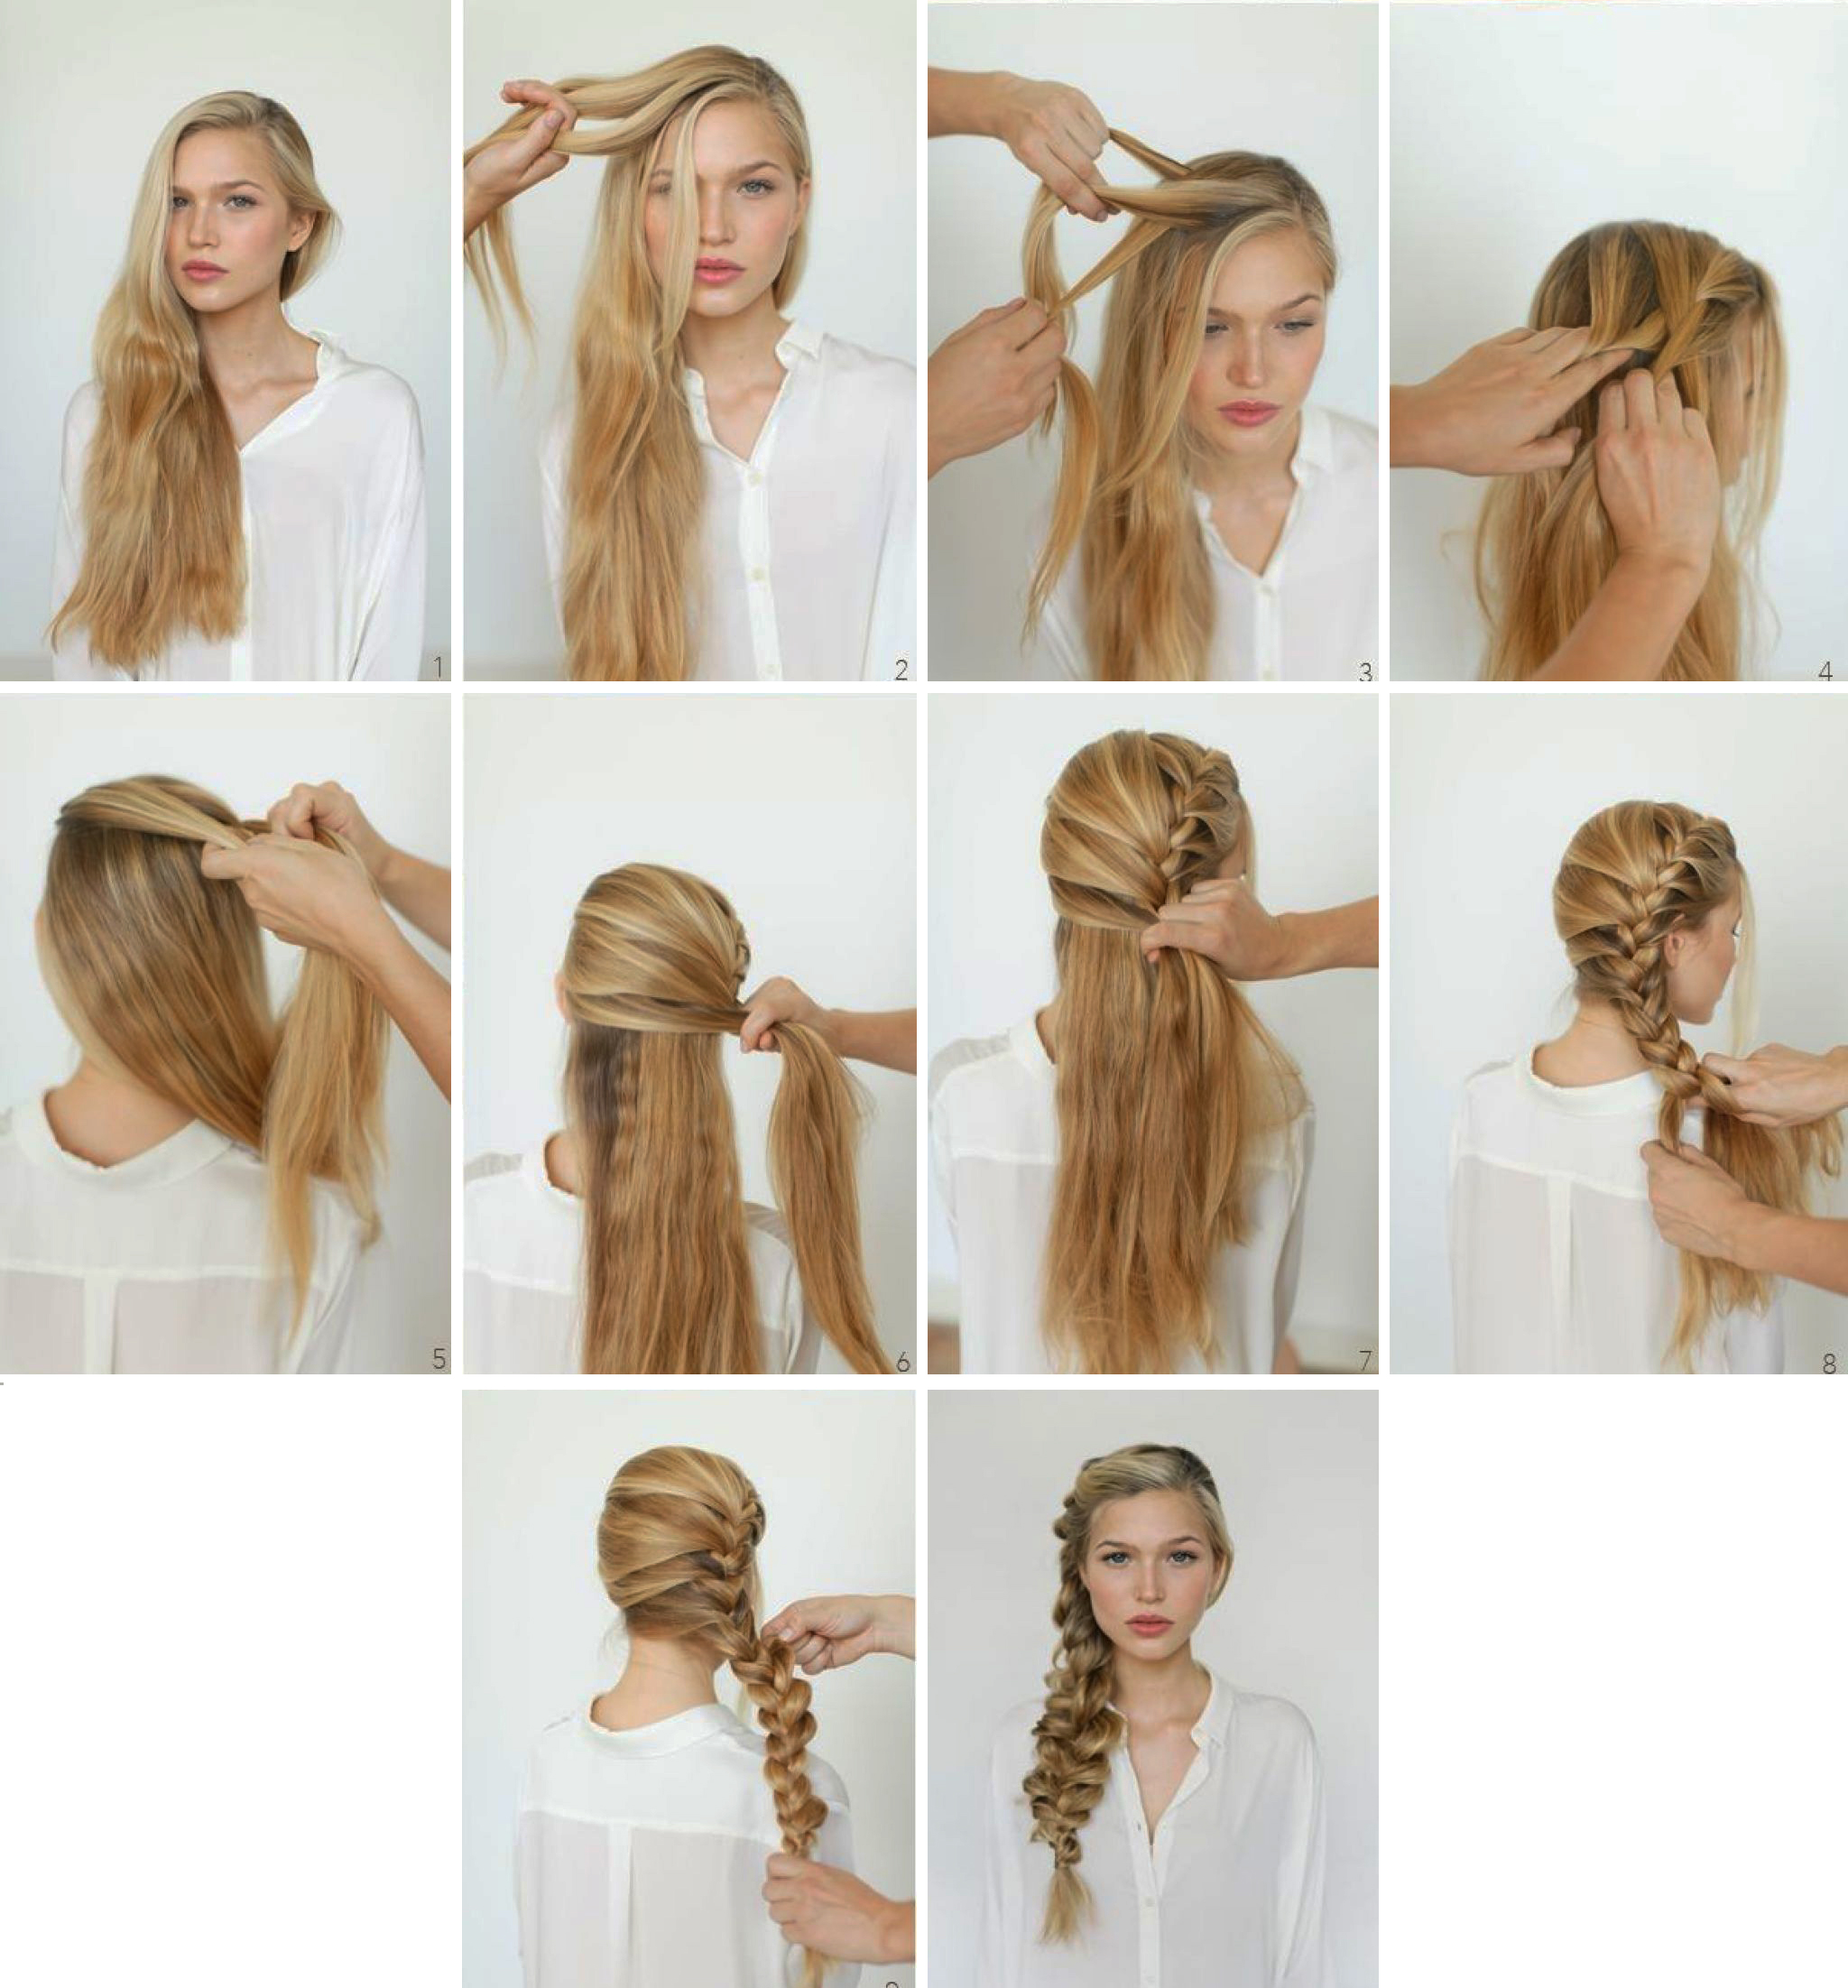 39+ Easy hairstyles with braids ideas in 2022 